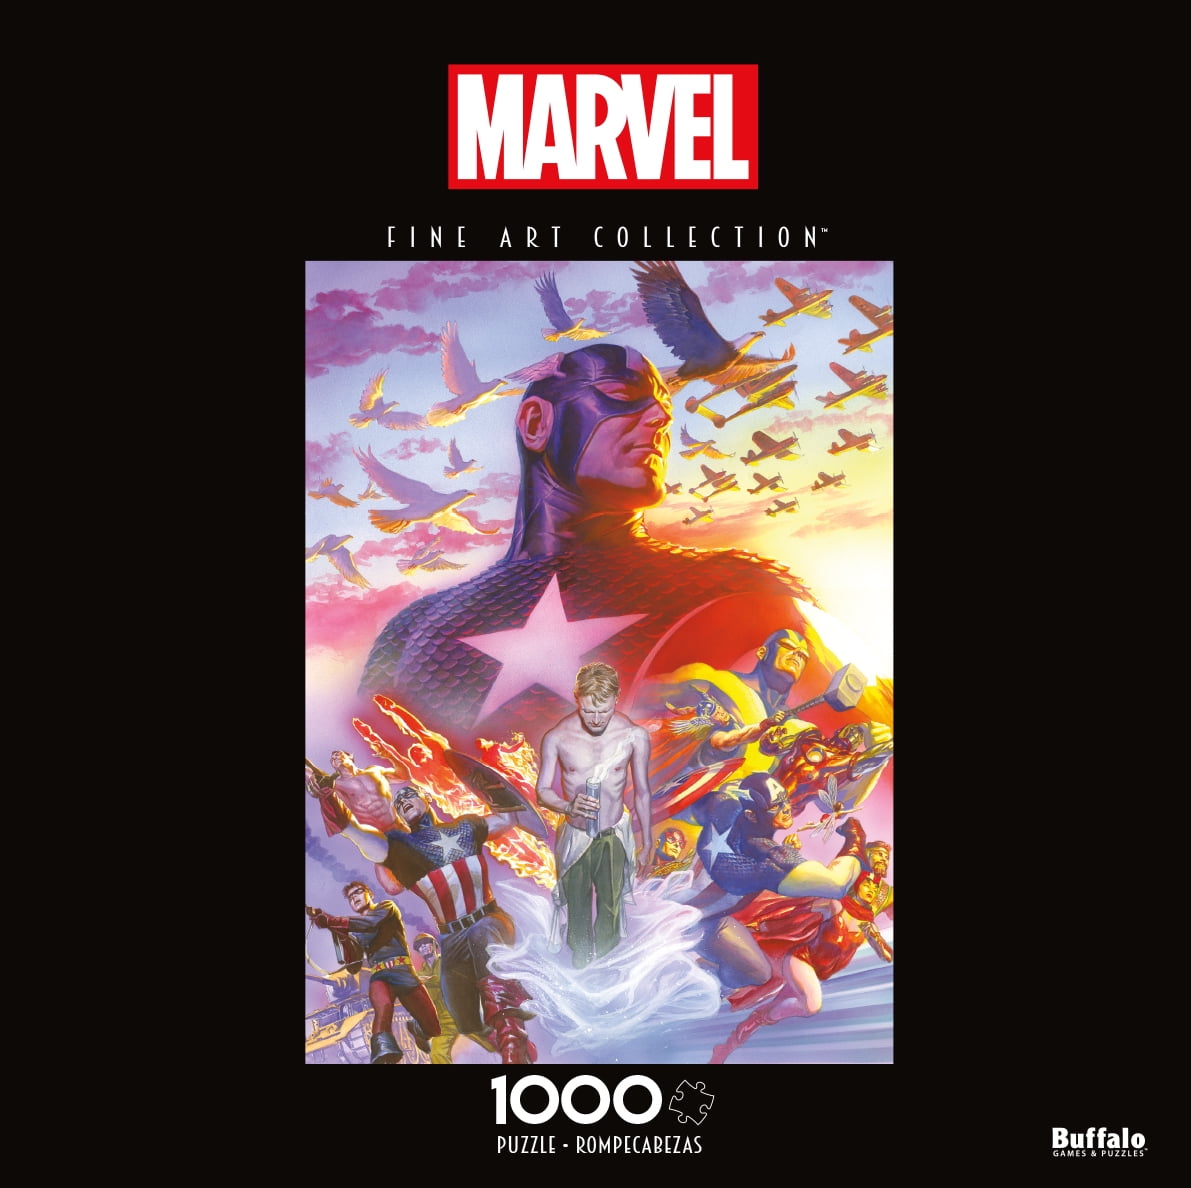 Officially Licensed... Details about   AQUARIUS Marvel Puzzle Cast 3000 Piece Jigsaw Puzzle 